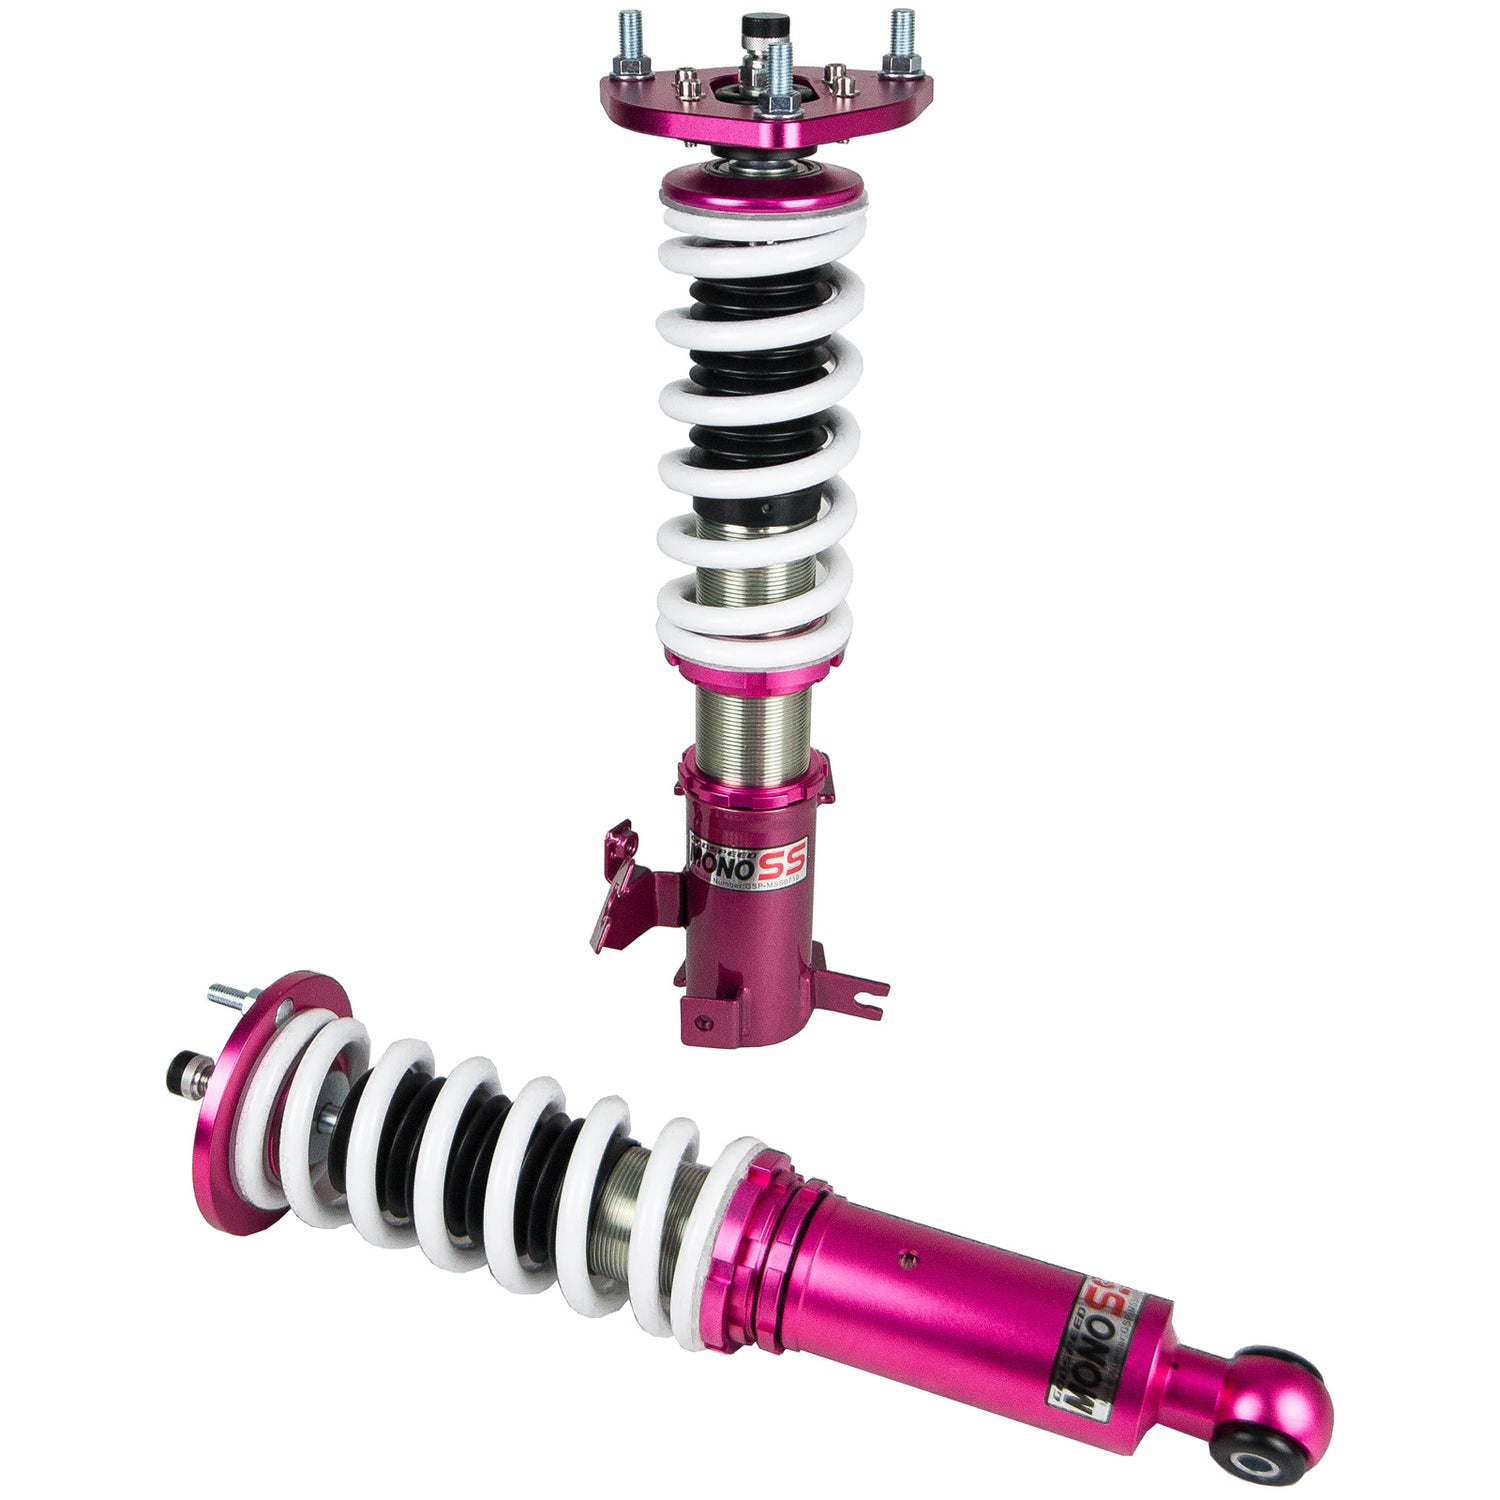 Godspeed MSS0710 MonoSS Coilover Lowering Kit, Fully Adjustable, Ride Height, Spring Tension And 16 Click Damping, Nissan Maxima(A32) 1995-99